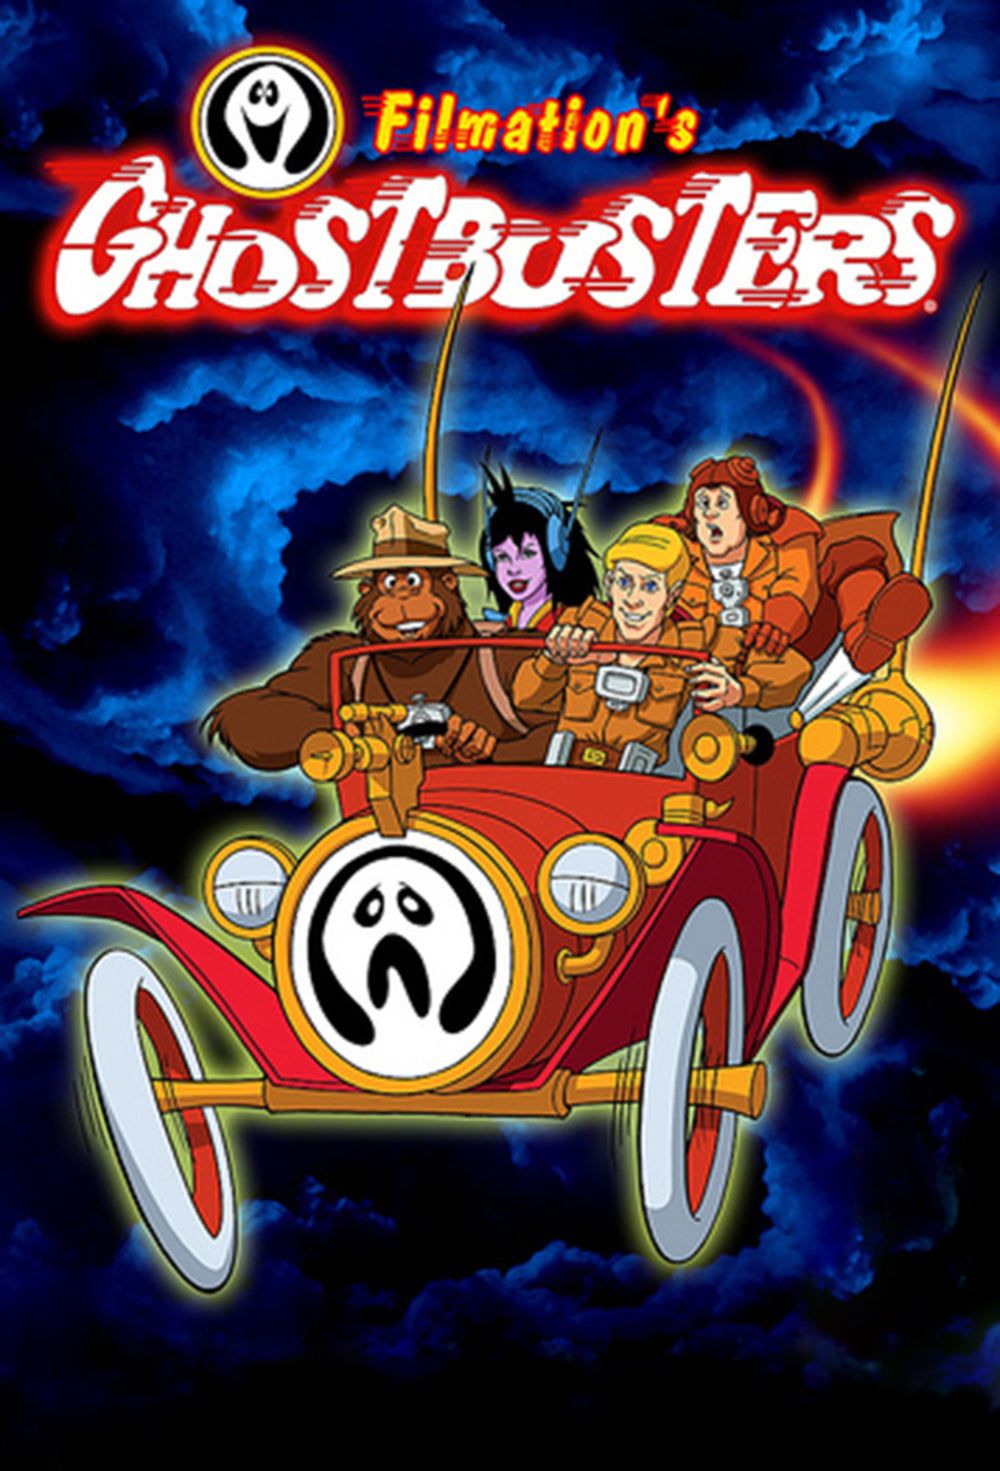 Ghostbusters - Filmation